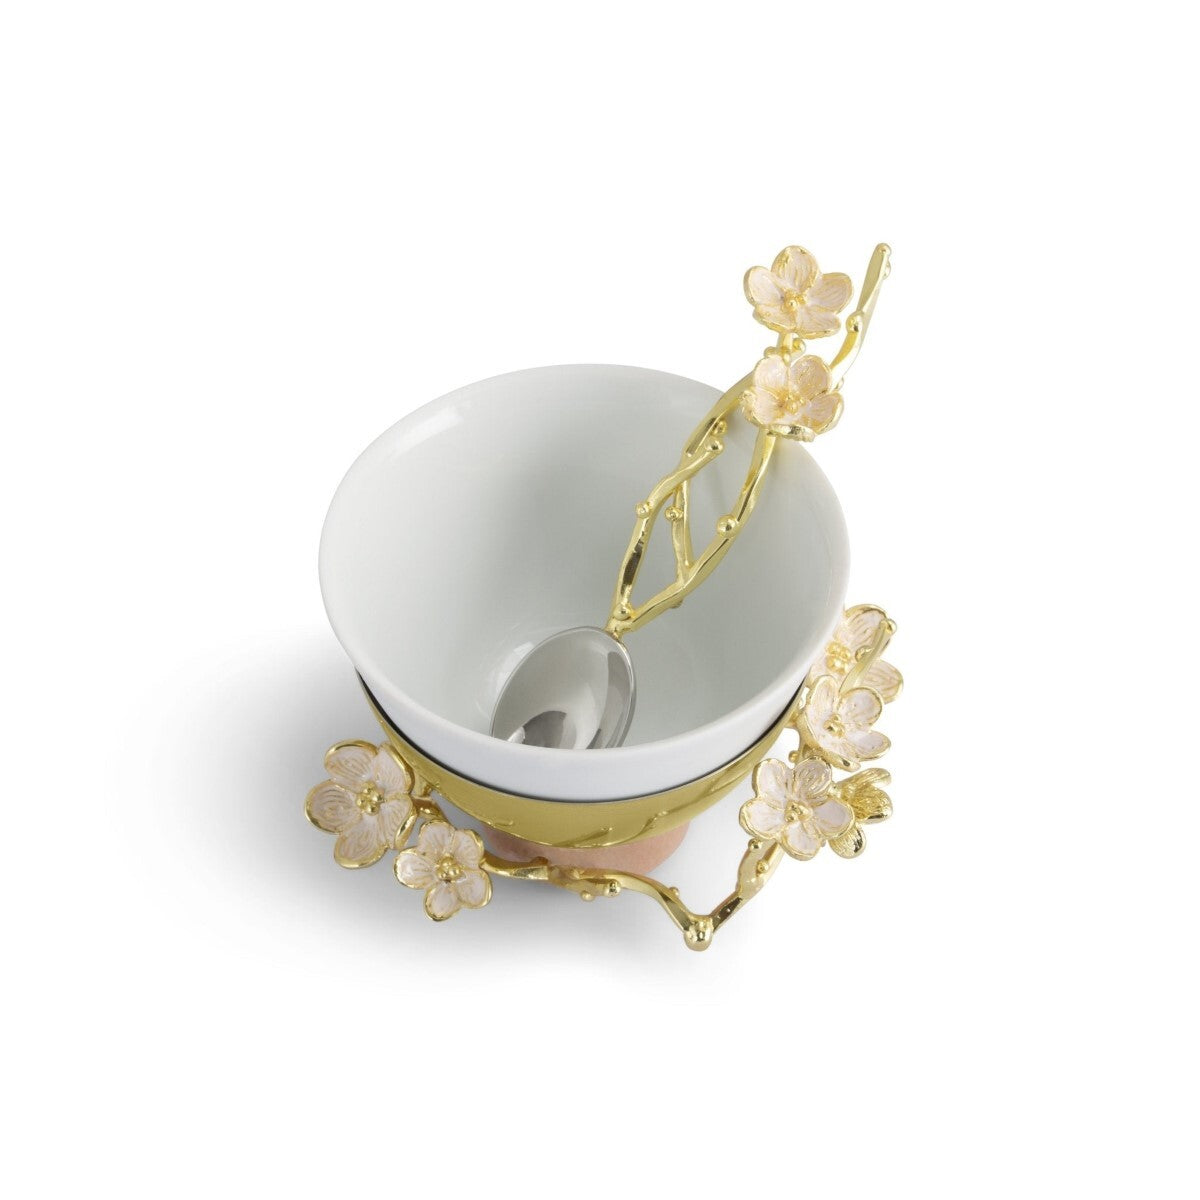 Cherry Blossom Porcelain Small Bowl With Spoon